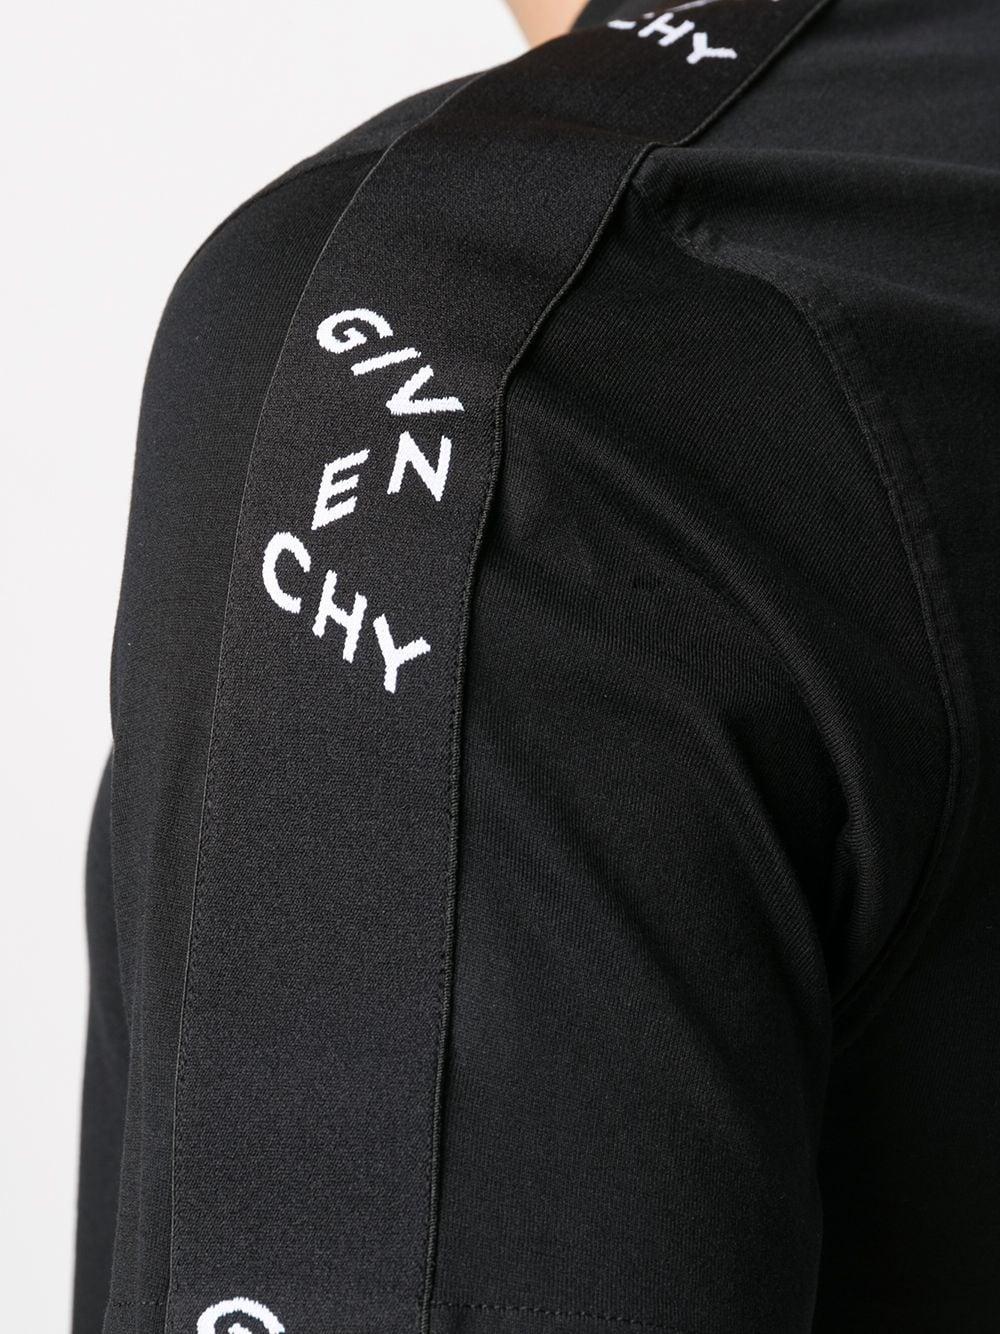 Givenchy Logo Tape T-shirt in Black for Men - Lyst